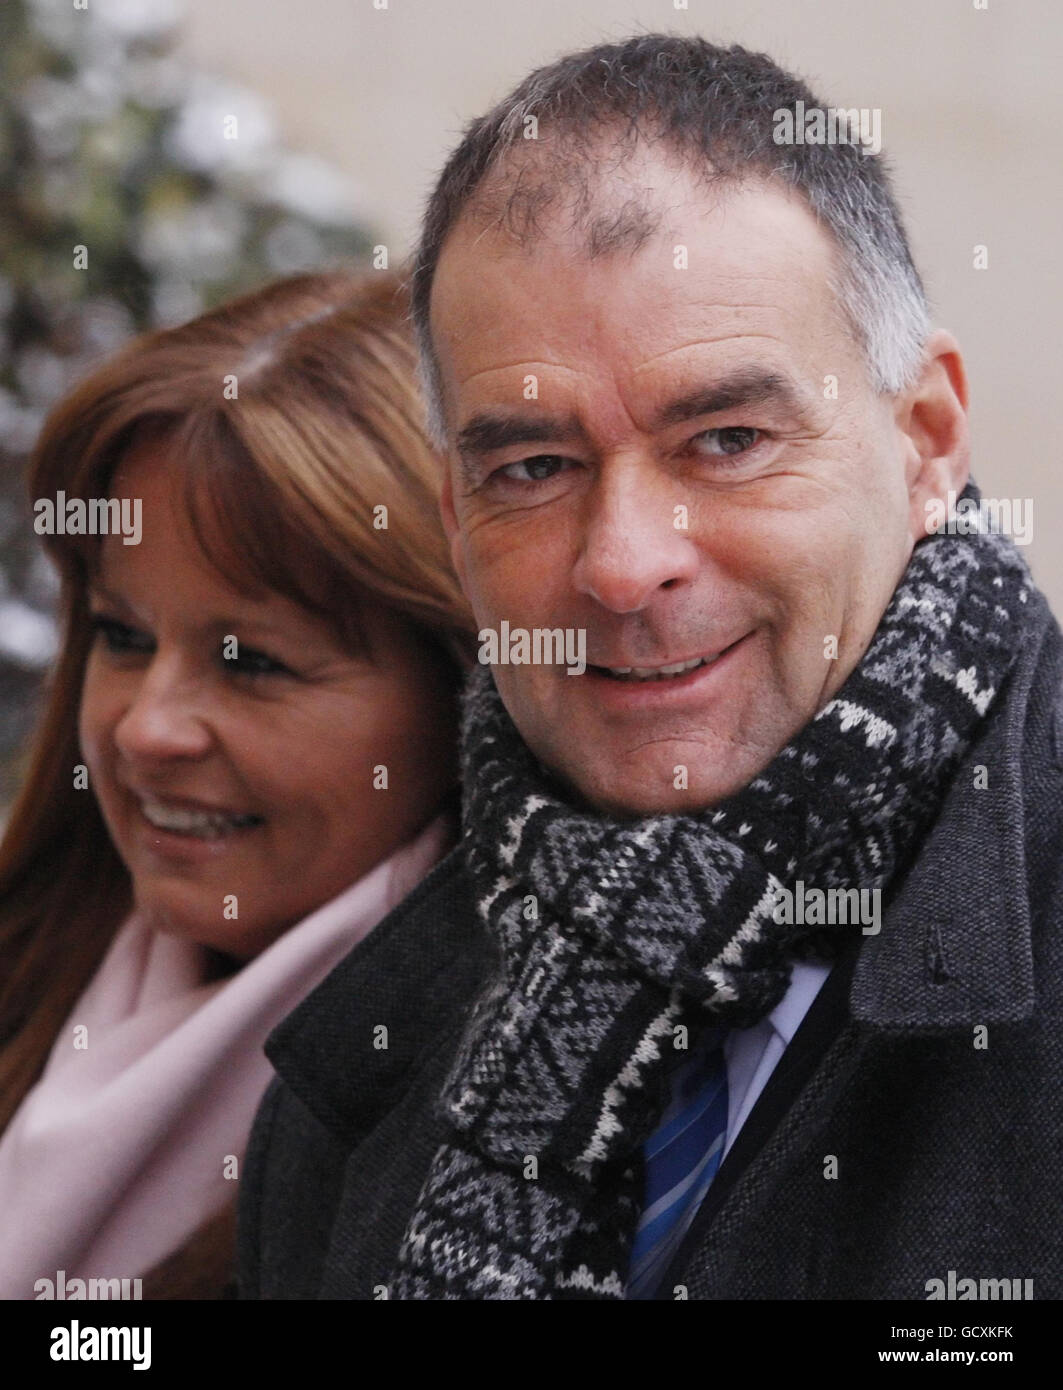 Tommy and Gail Sheridan arrive at Glasgow High Court, where Mr Sheridan is on trial accused of lying under oath during his successful defamation action against the News of the World newspaper in 2006. Stock Photo